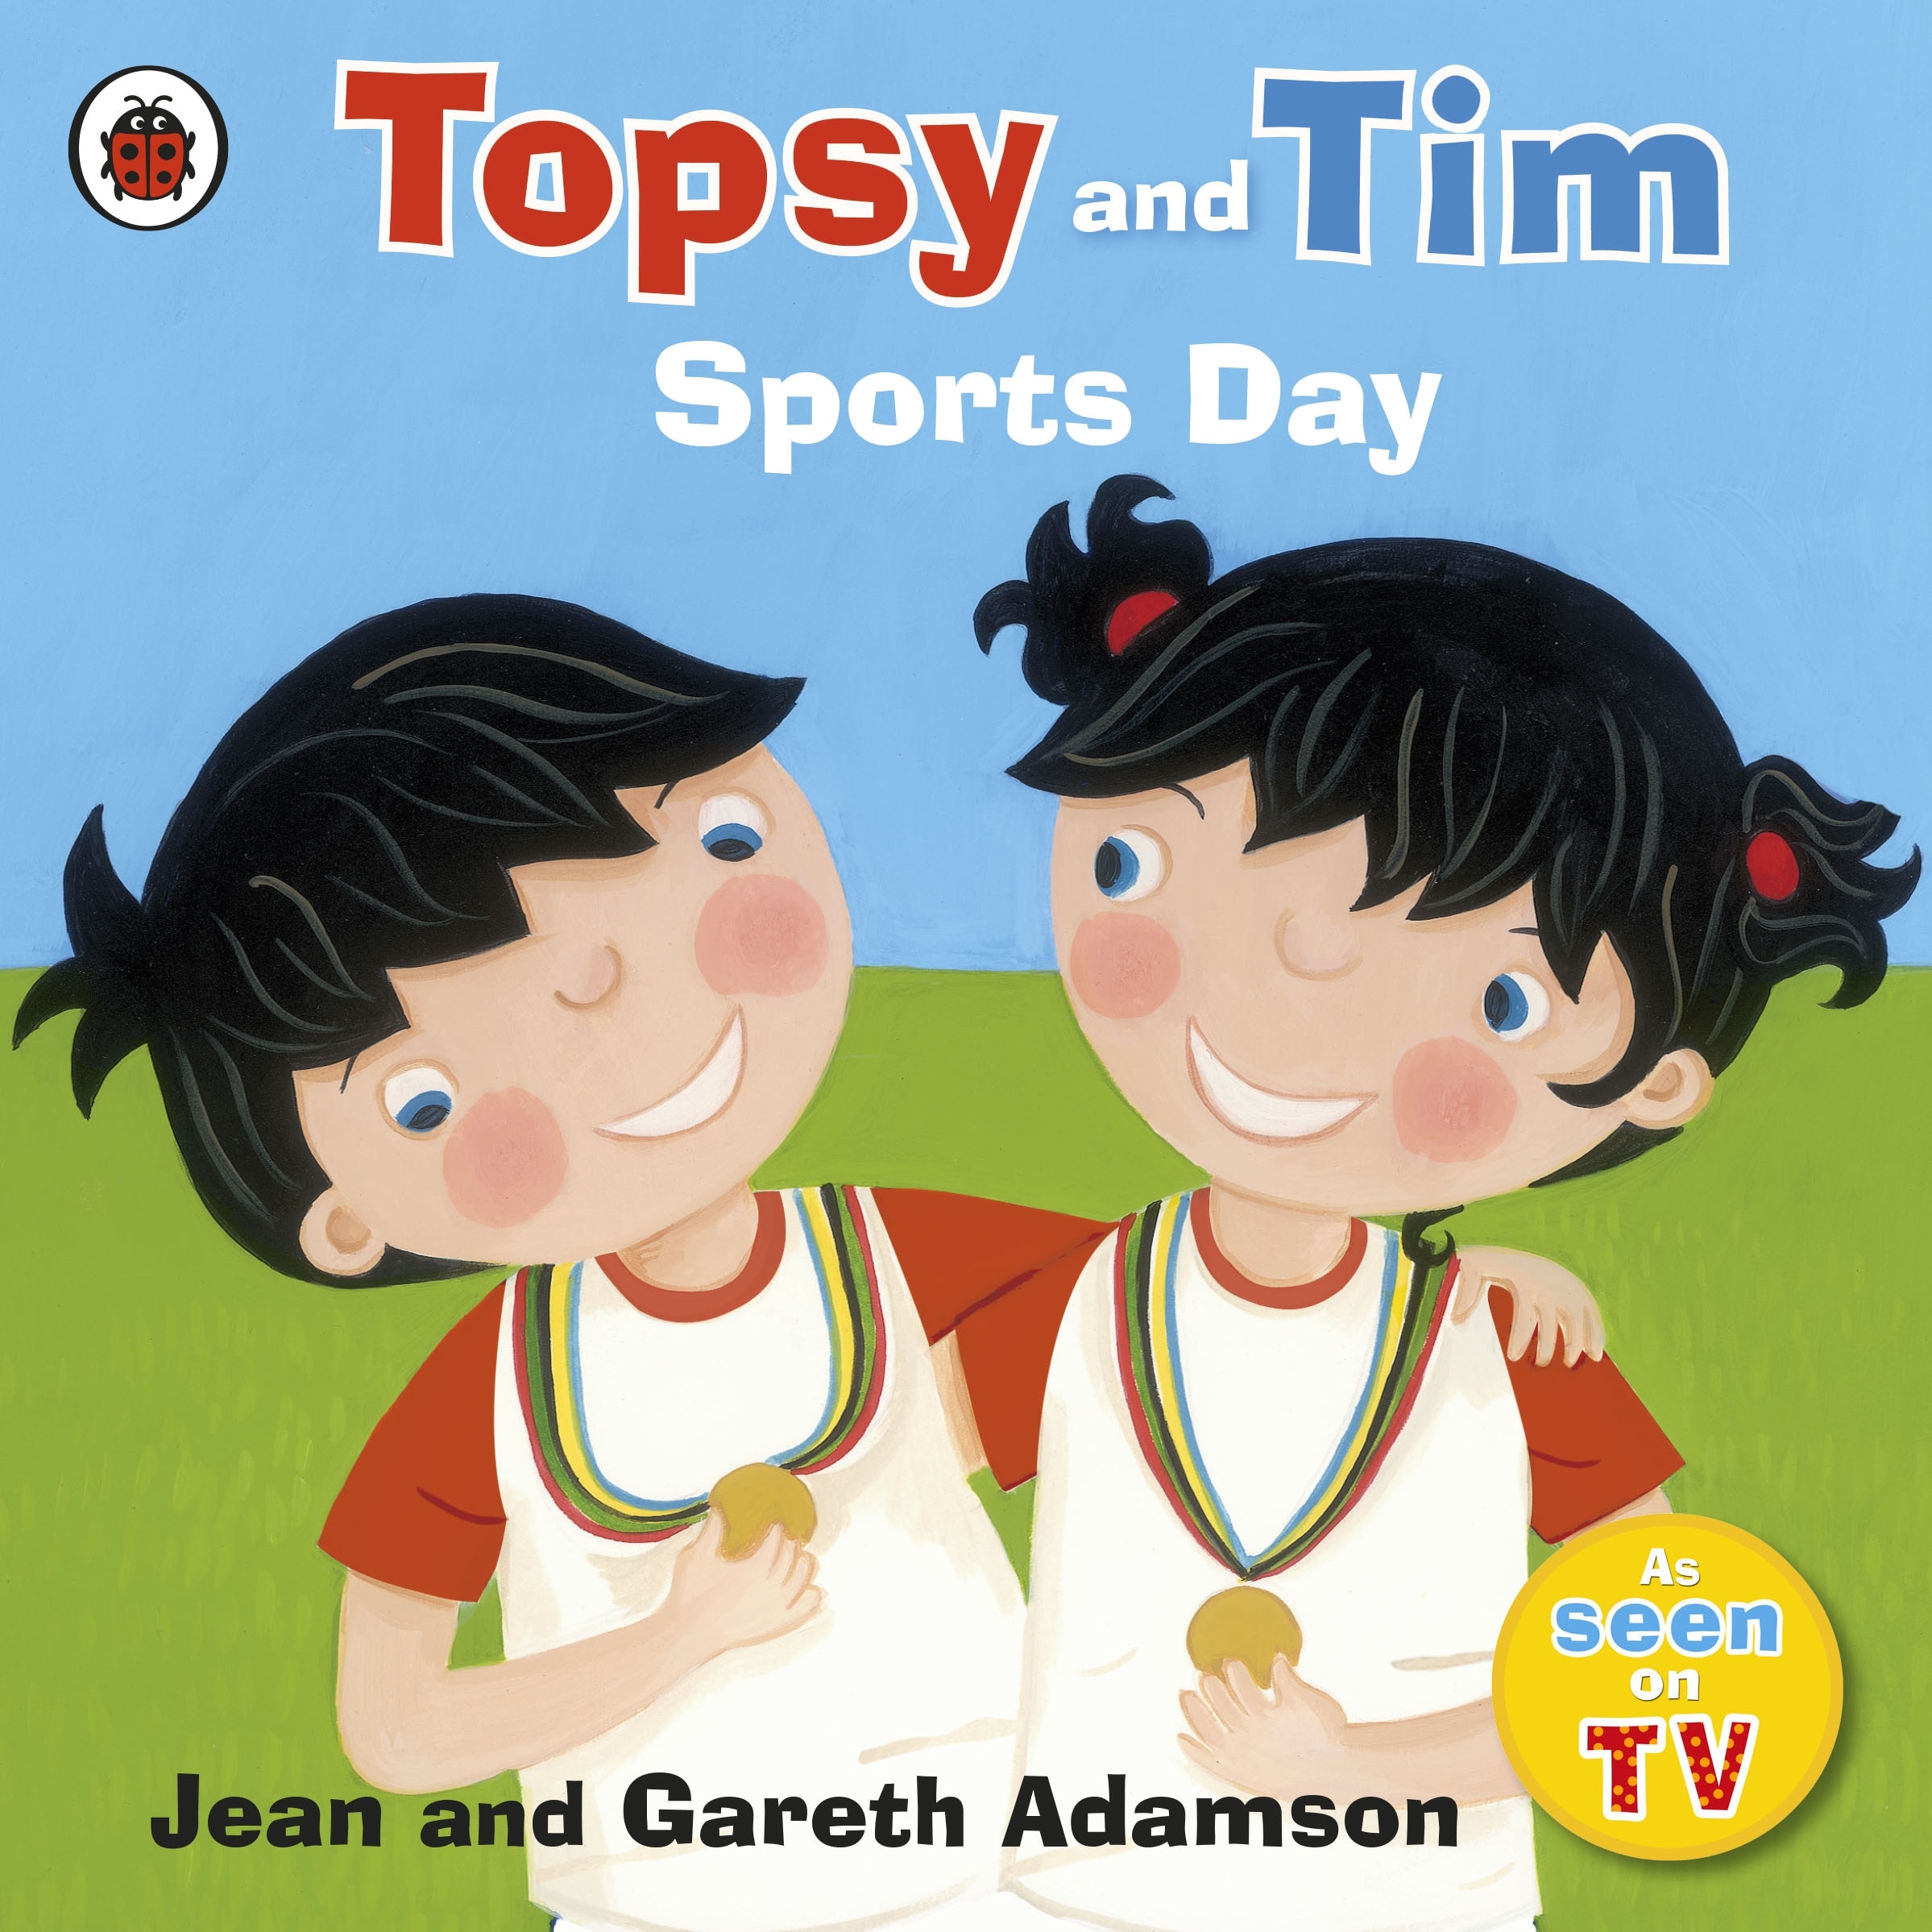 Book “Topsy and Tim Sports Day” by Jean Adamson — January 2, 2014